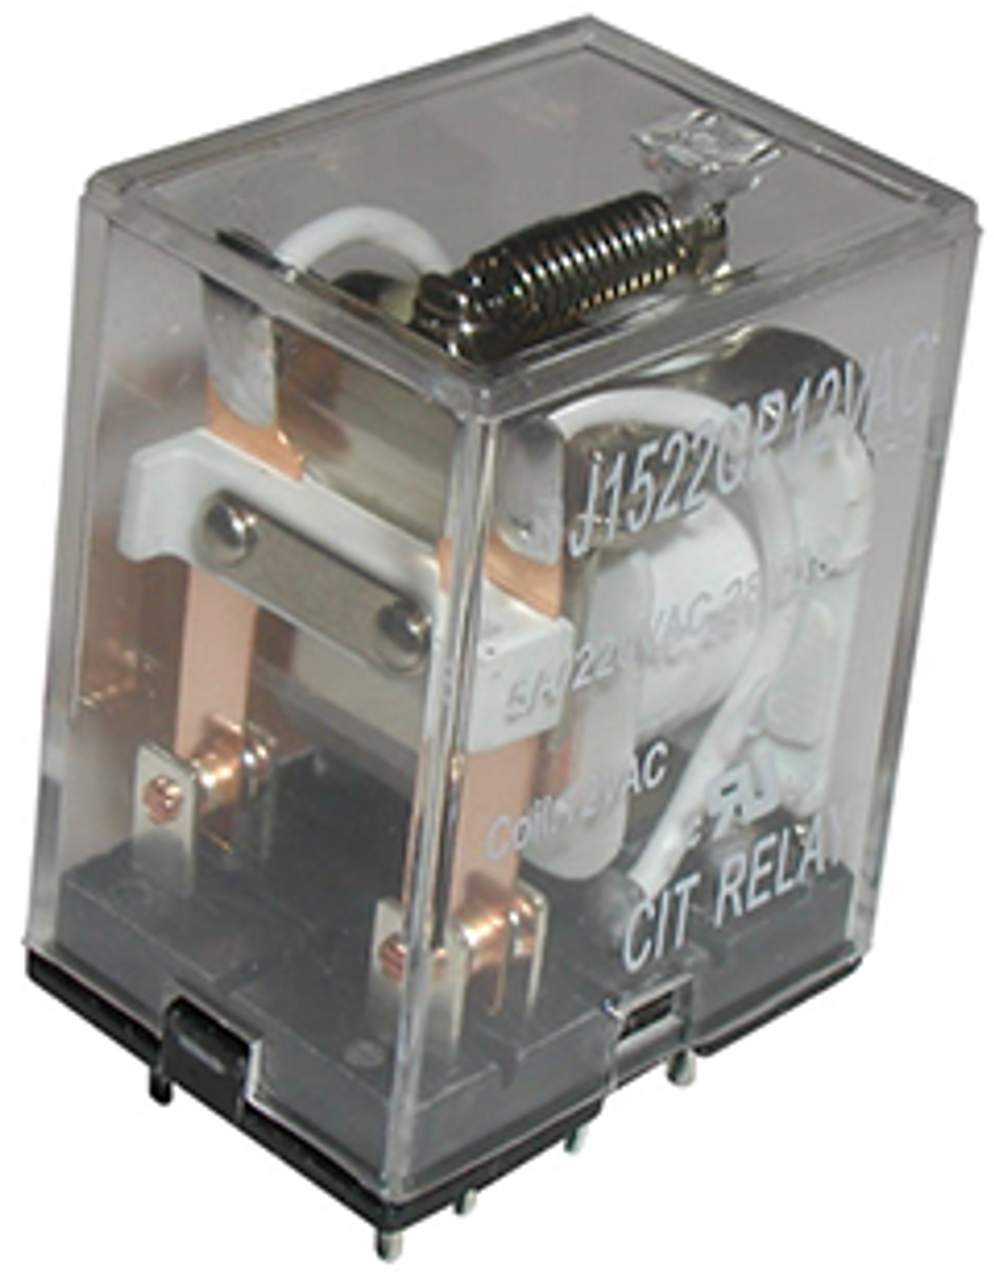 CIT Relay and Switch J1523CP12VACDT Industrial Relays